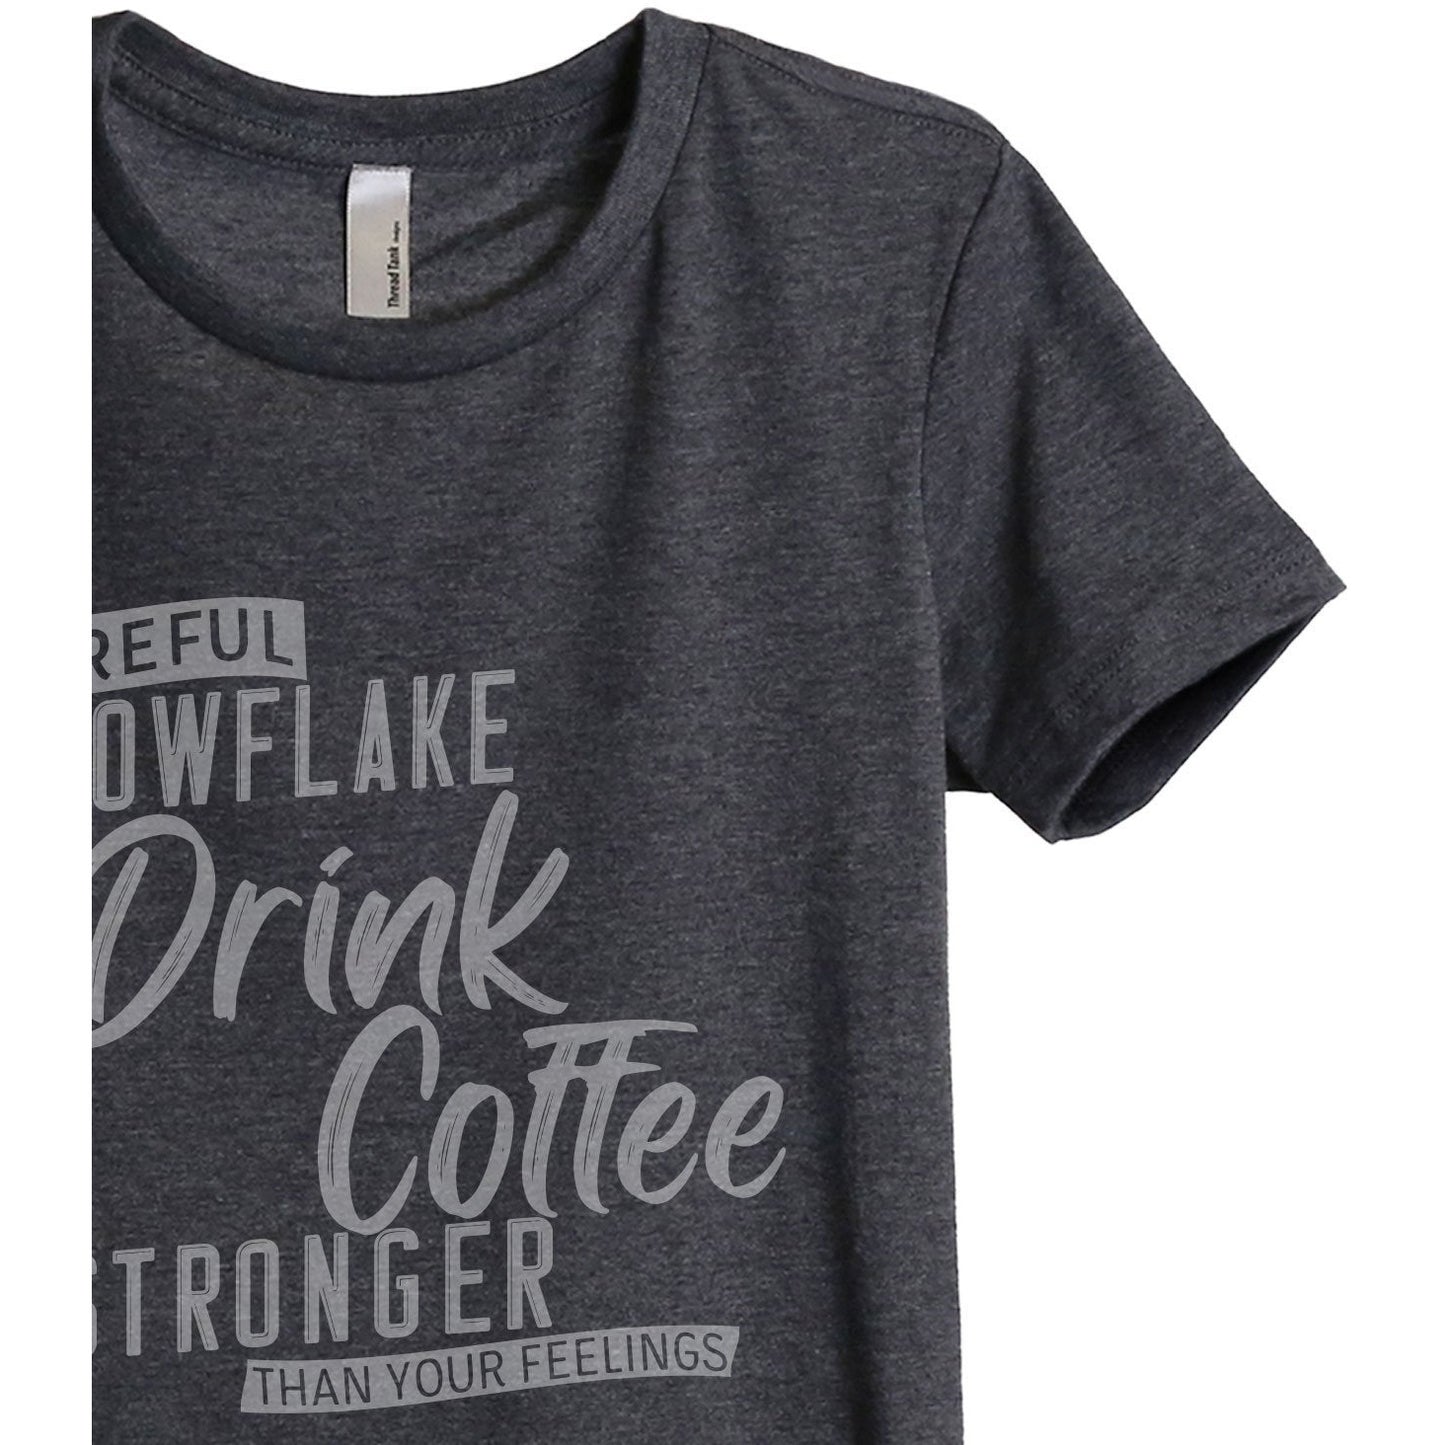 Careful Snowflake...I Drink Coffee Stronger Than Your Feelings Women's Relaxed Crewneck T-Shirt Top Tee Charcoal Grey Zoom Details